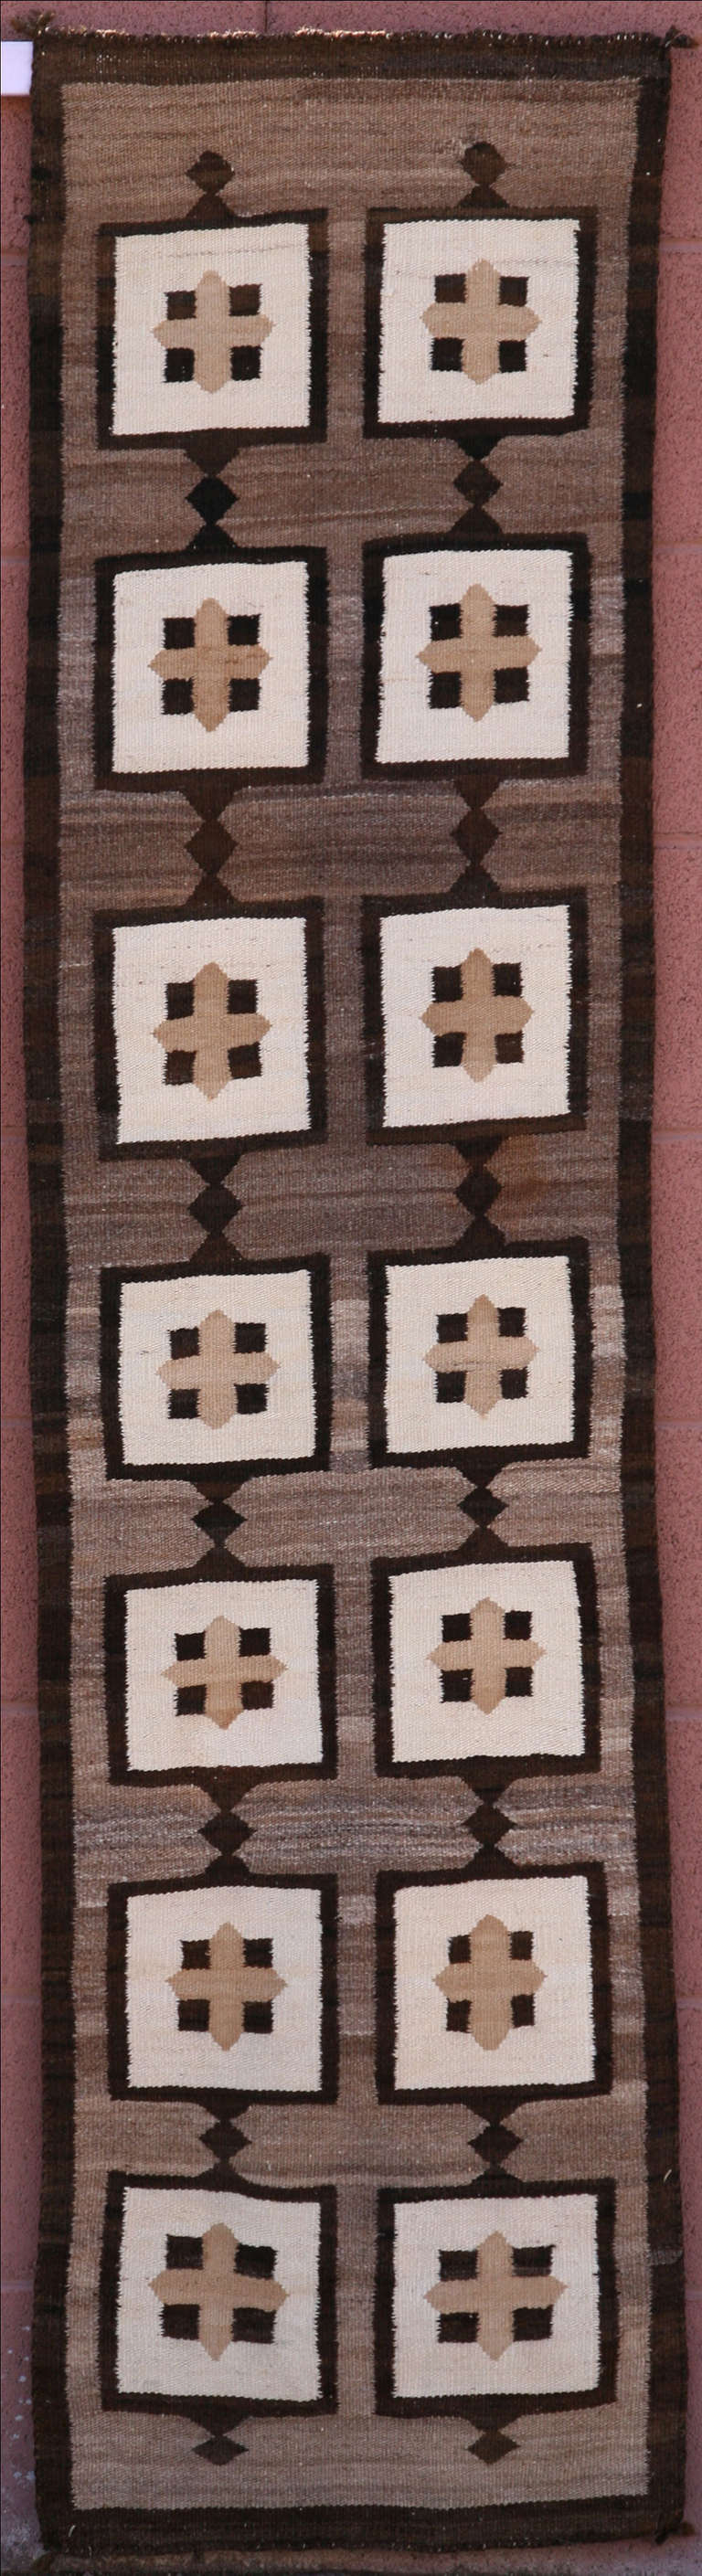 Rare runner size made at the Crystal trading post area around 1910, natural home spun wool.